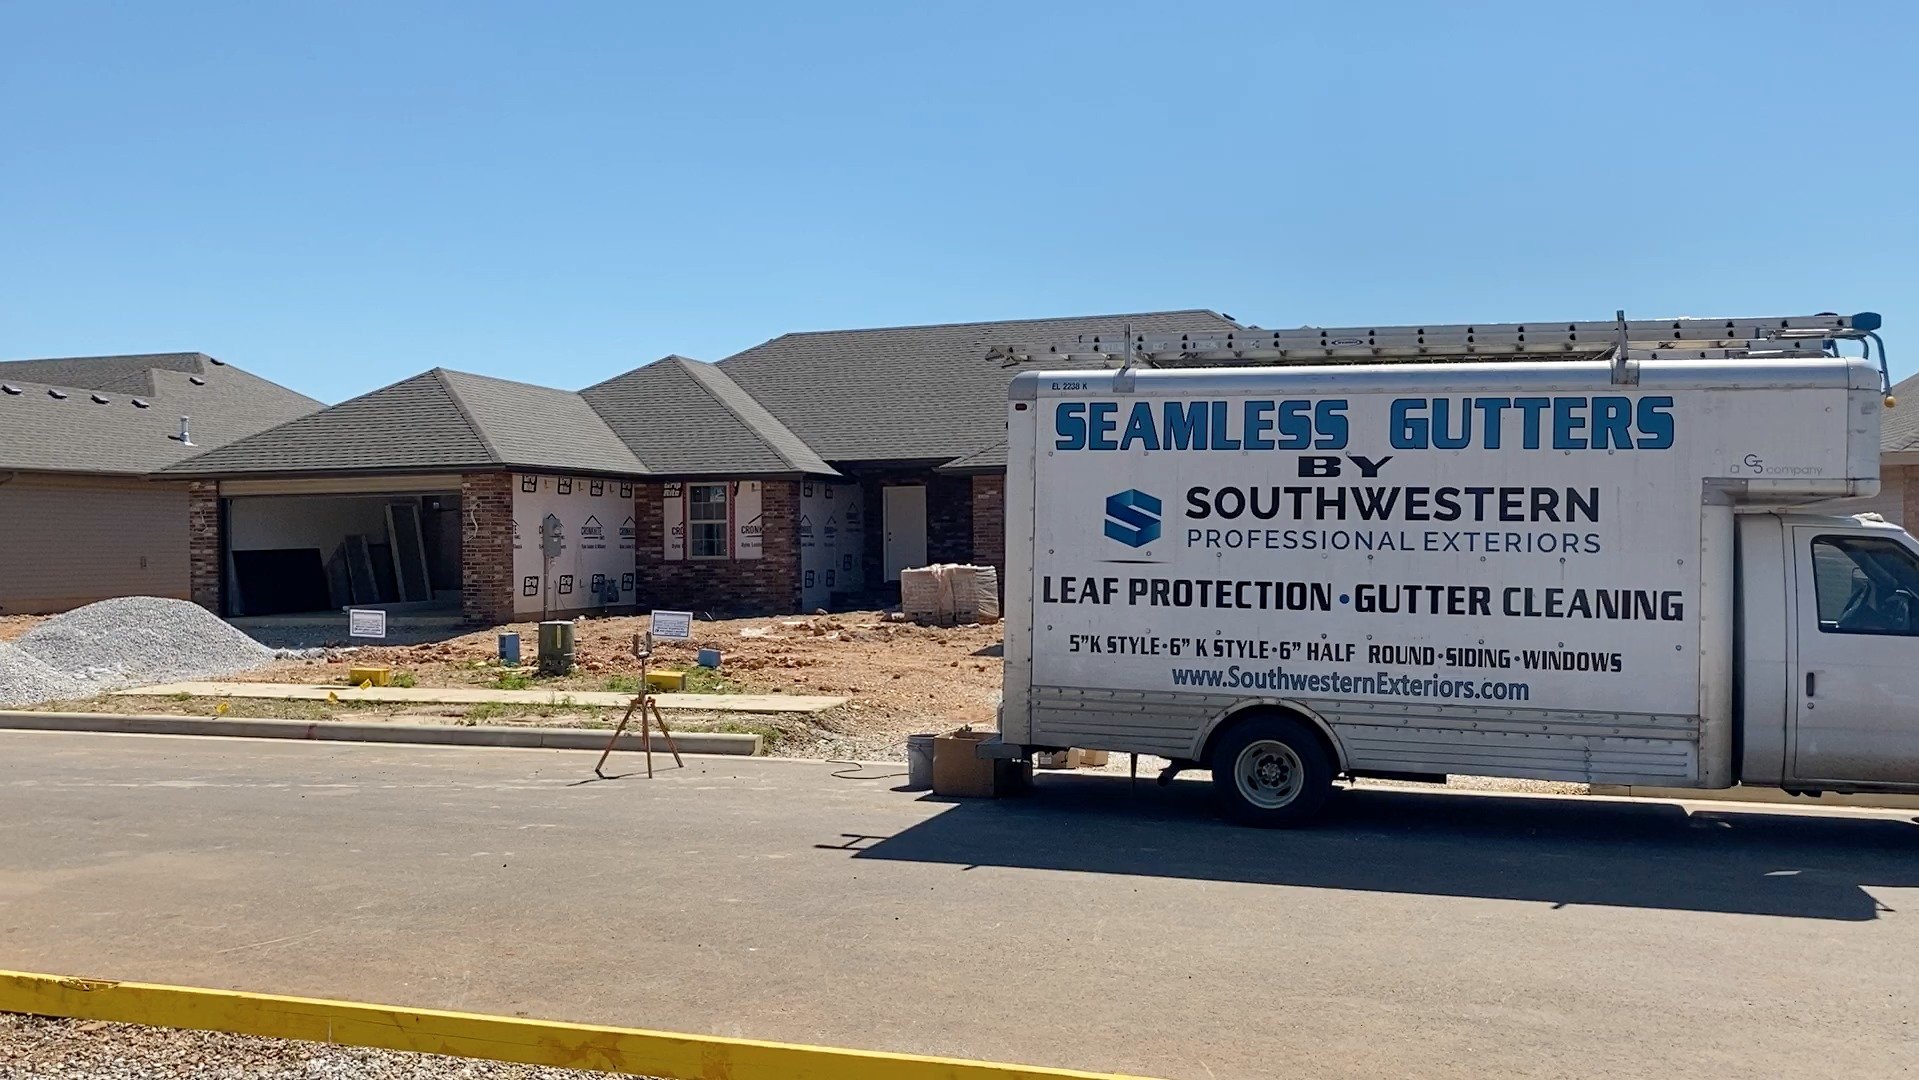 Rain or shine, we've got your home covered! ☔ 
-
Our expert team at Southwestern Exteriors is hard at work installing top-of-the-line gutters to protect your home. With quality installation and durable materials, we ensure your home stays dry and pro